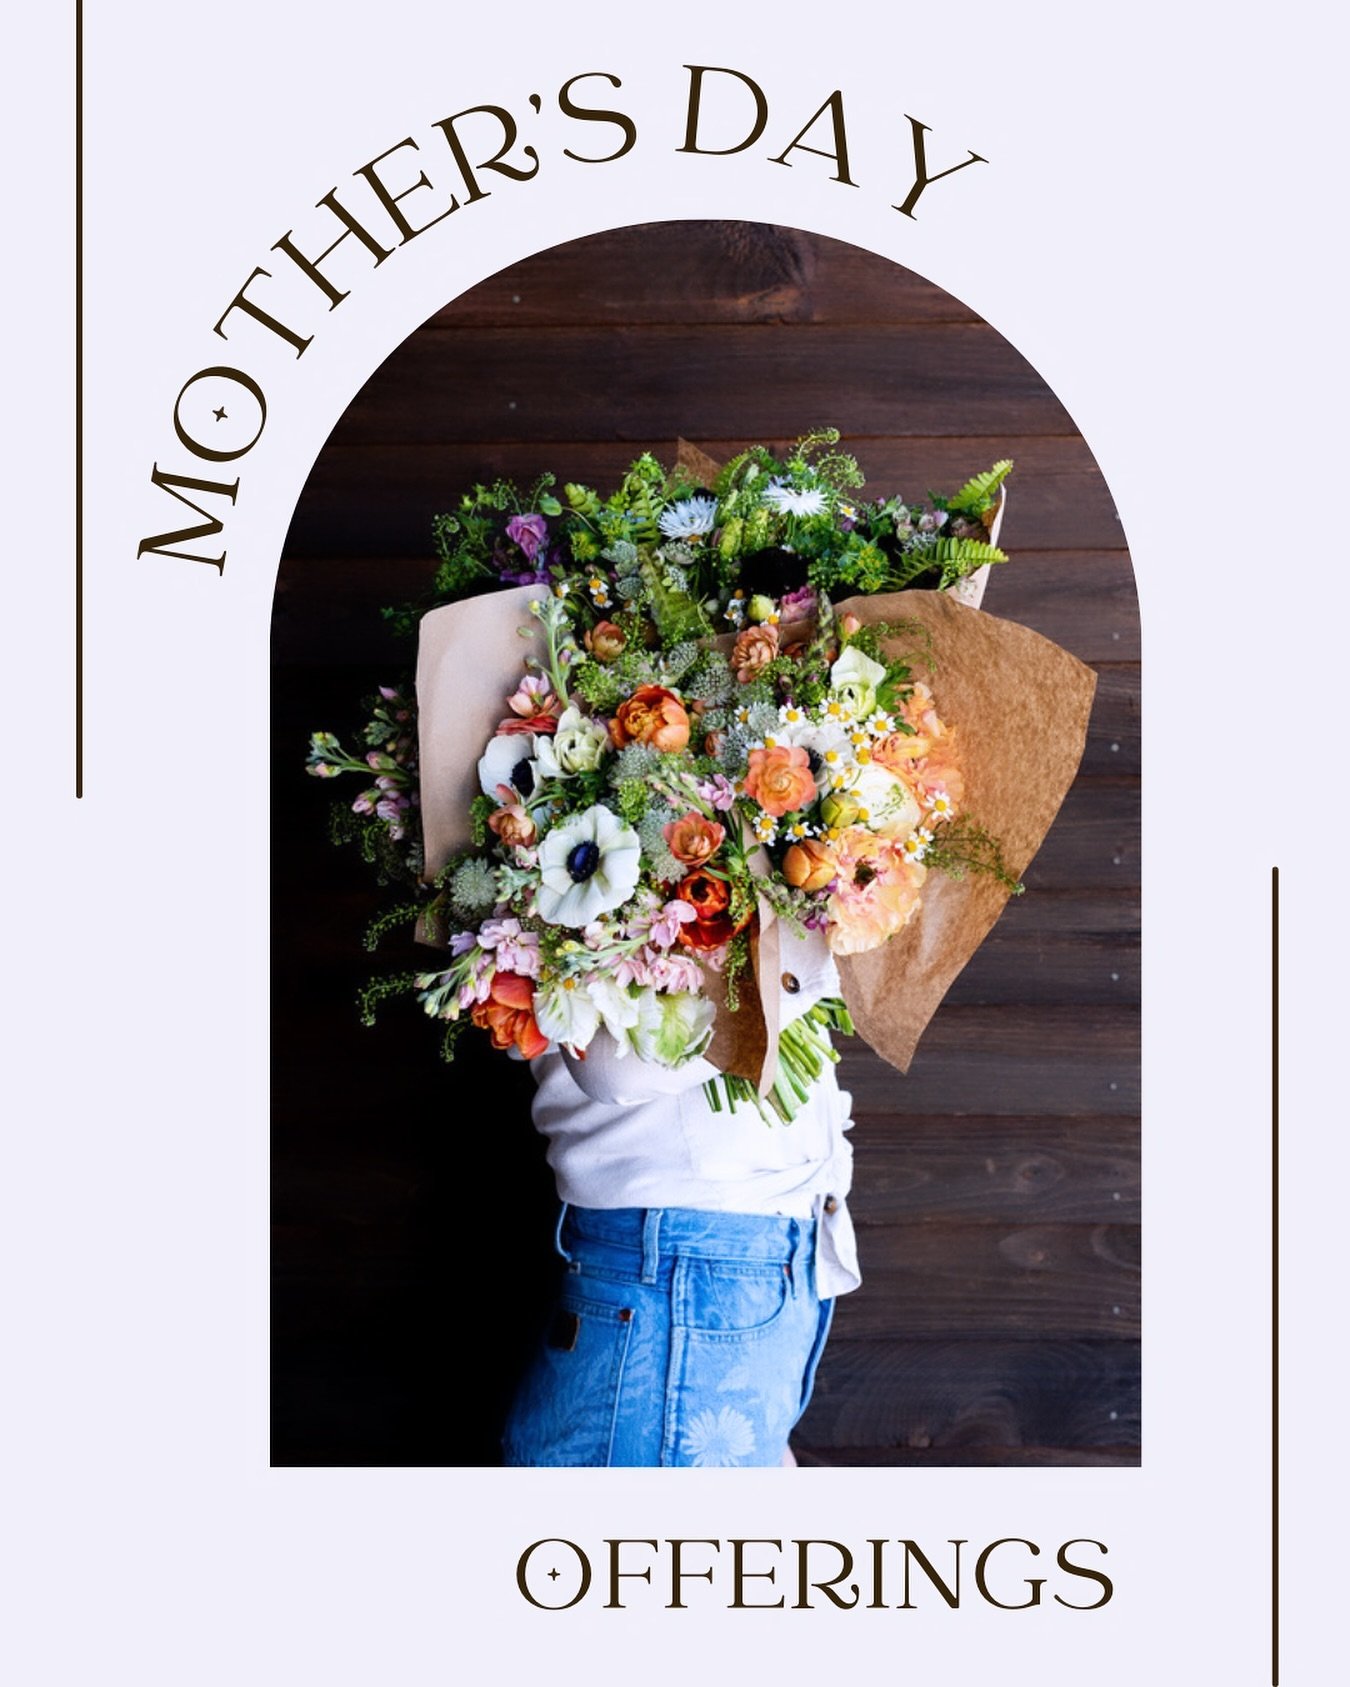 Hey you! Yeah, you! Did you know that Mother&rsquo;s Day is only 10 days away?! The best way to express your feelings of love and gratitude is spoiling her with a doorstep surprise bursting with local flower magic! Order a bespoke hand-tied bouquet o